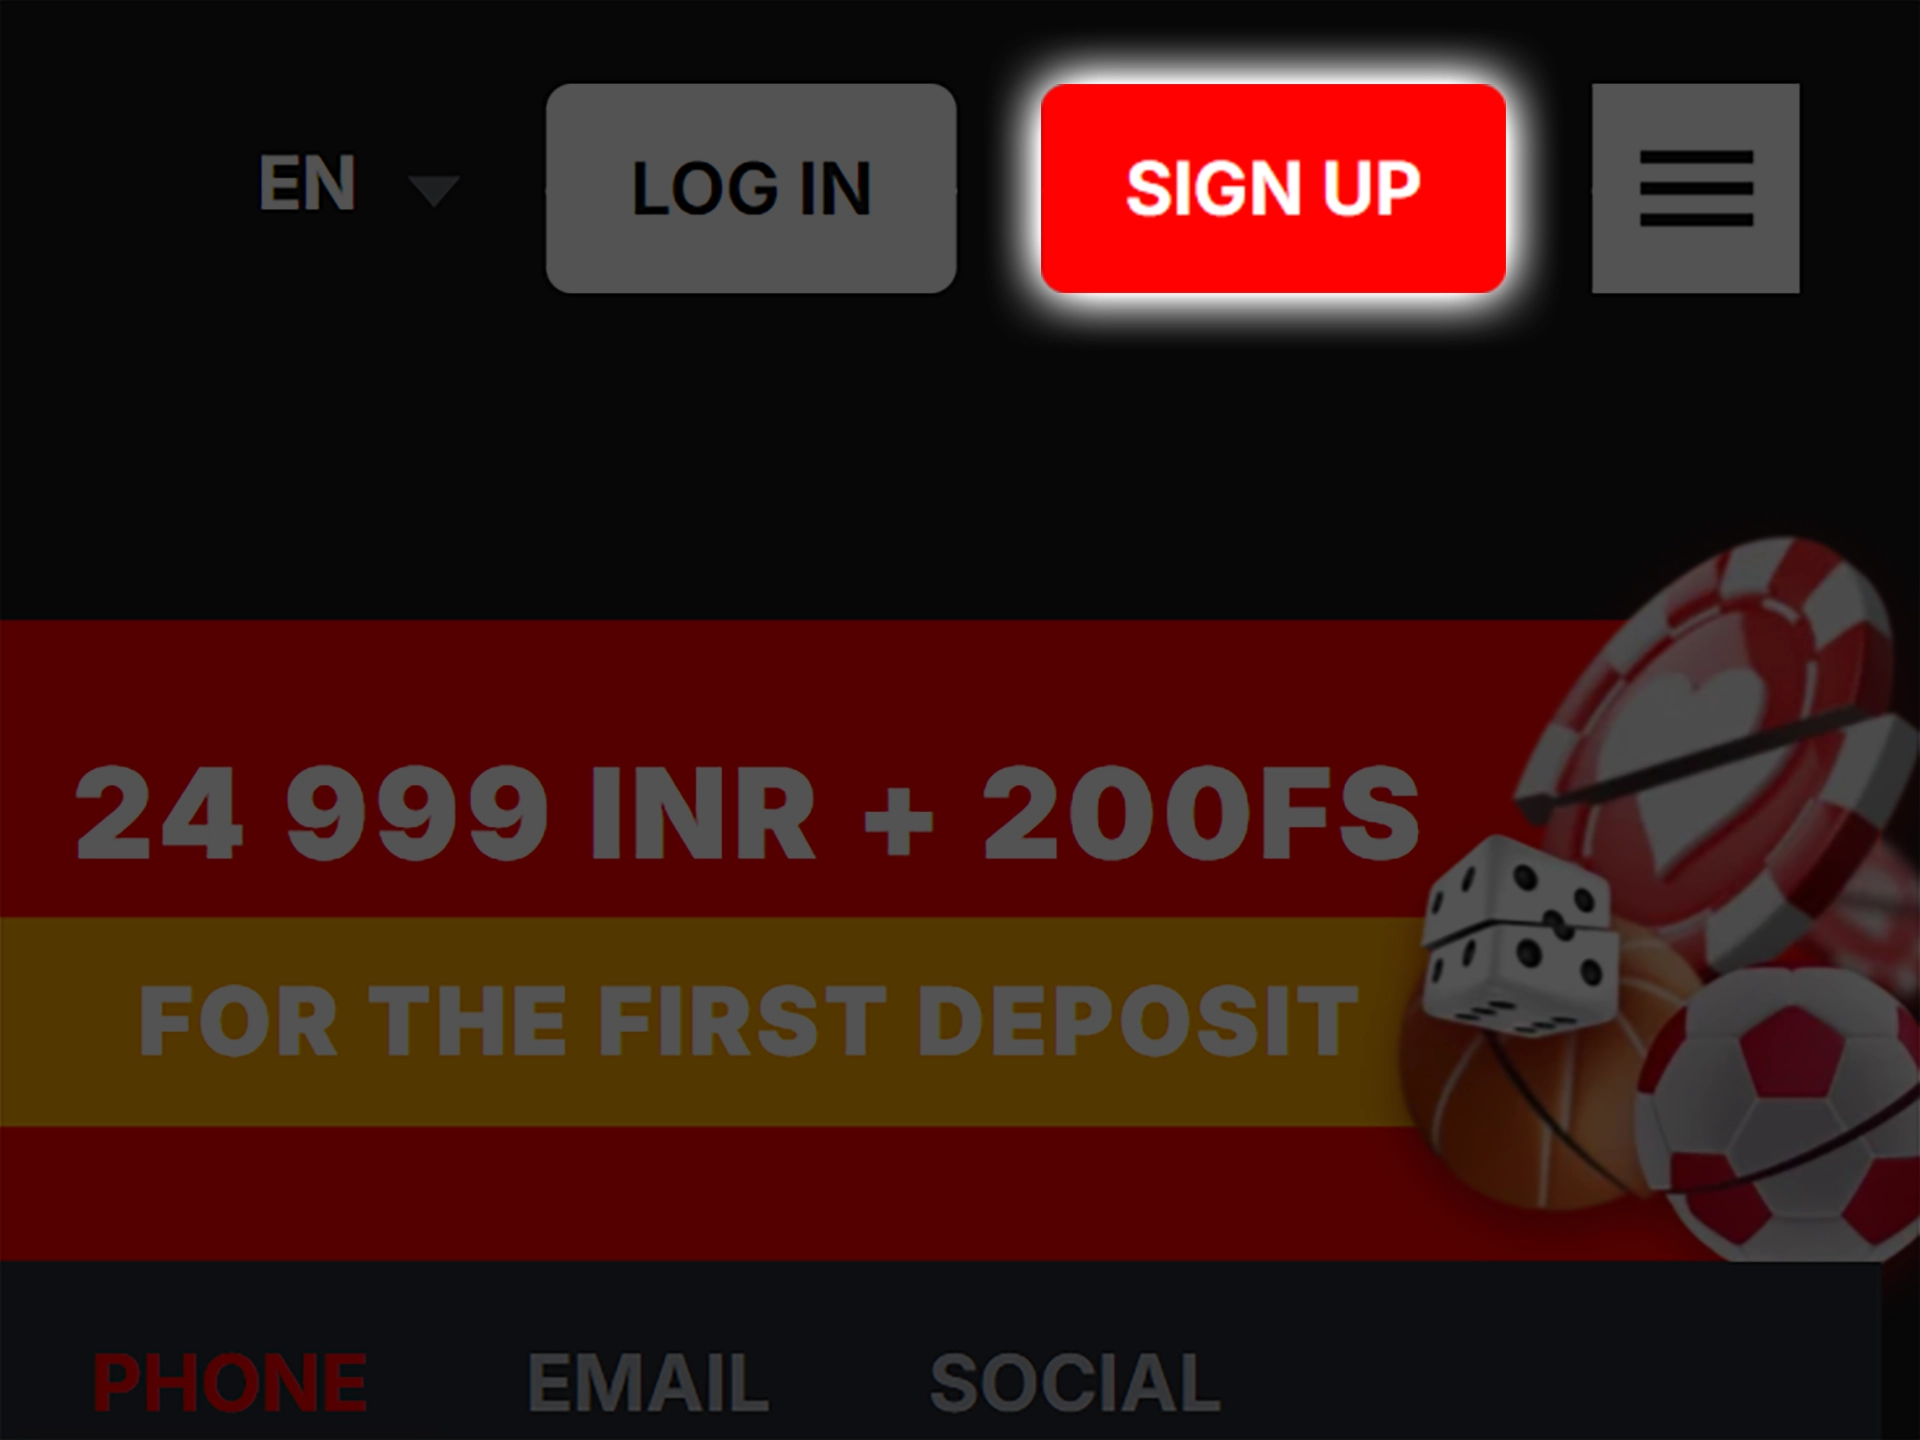 To start registering at Banzai Bet, click on the sign up button.